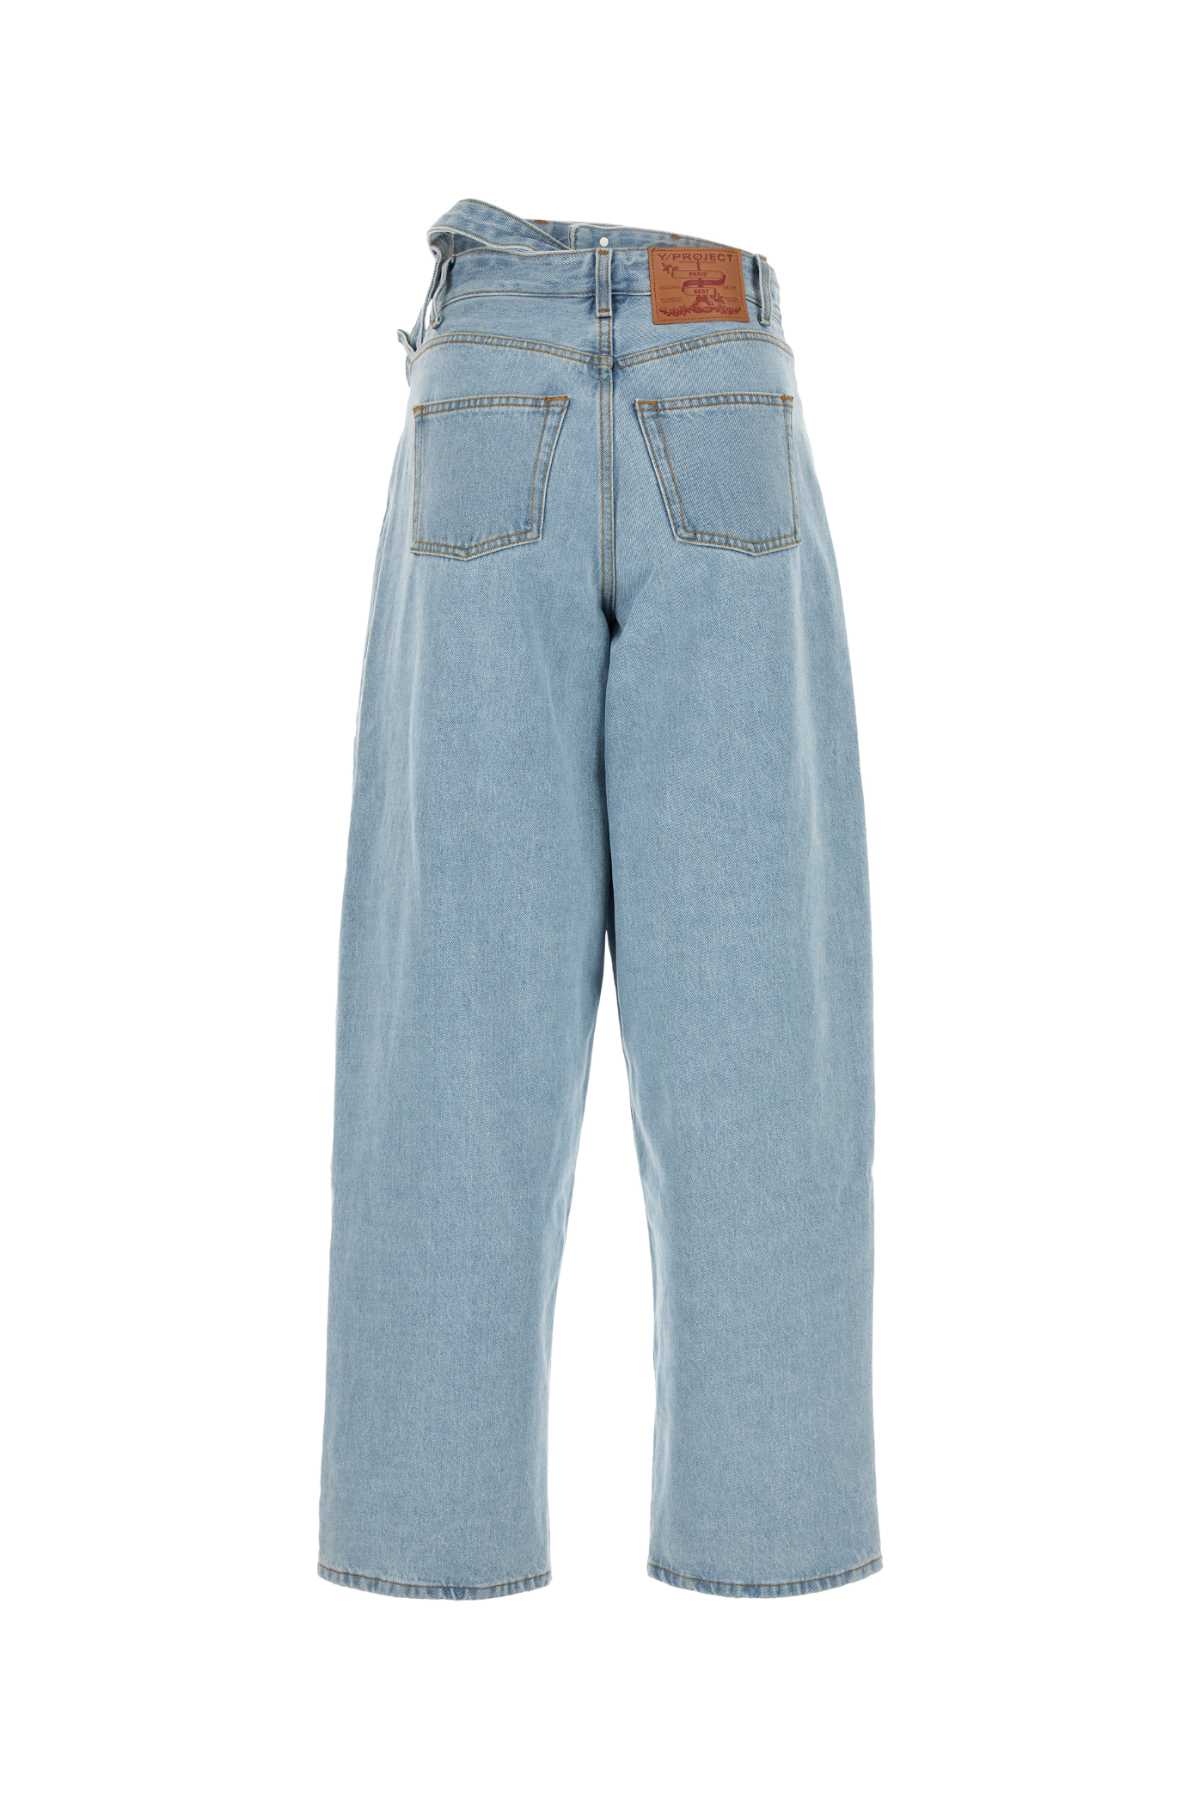 Y/project Light Blue Denim Jeans In Evergreen Ice Blue